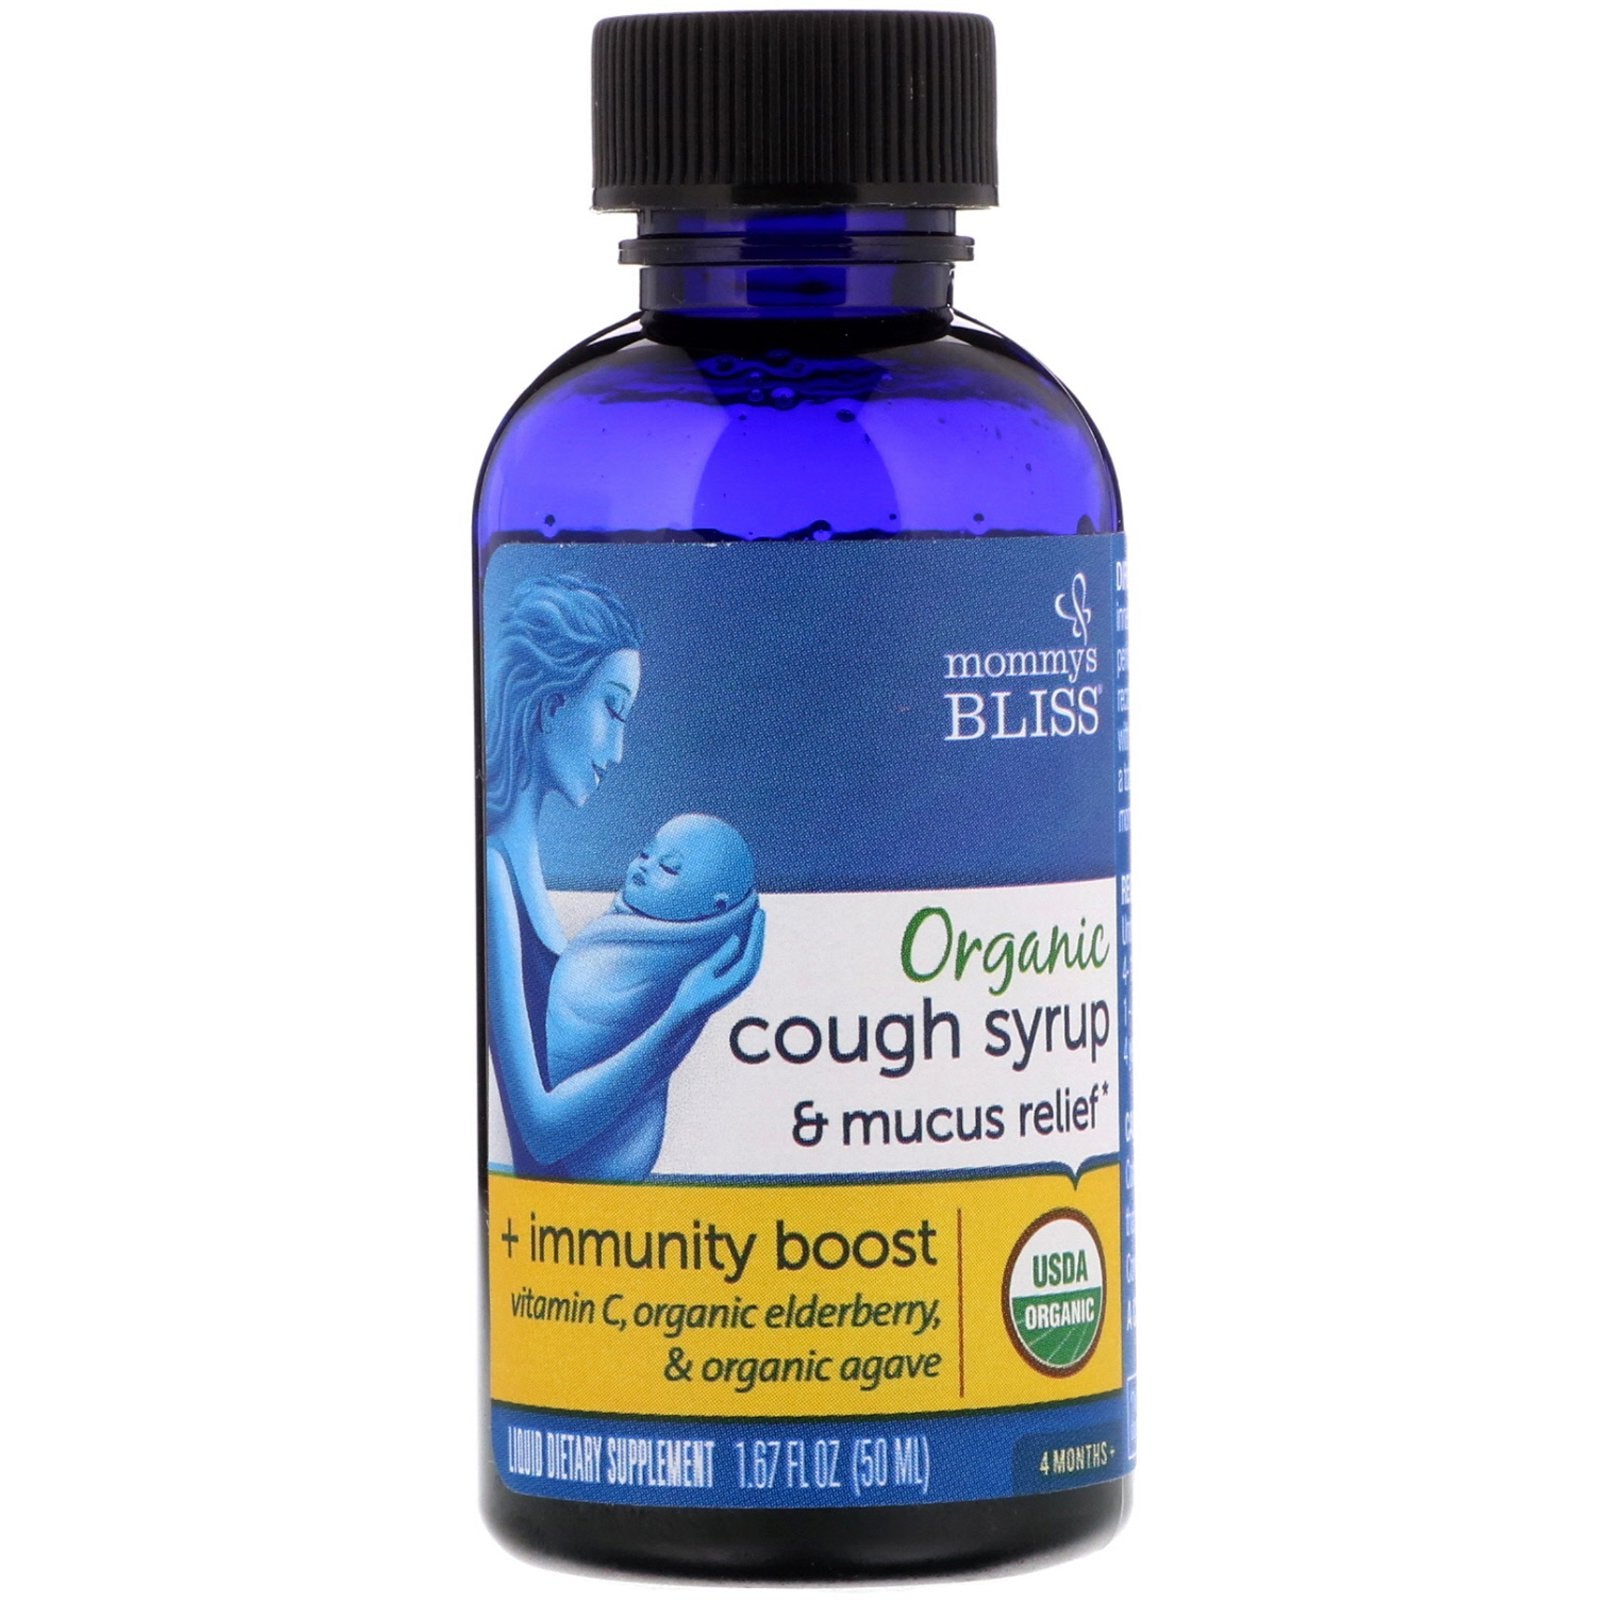 Mommy s Bliss Organic Cough Syrup Mucus Relief Immunity Boost 4 Months 1 67 fl oz 50 ml